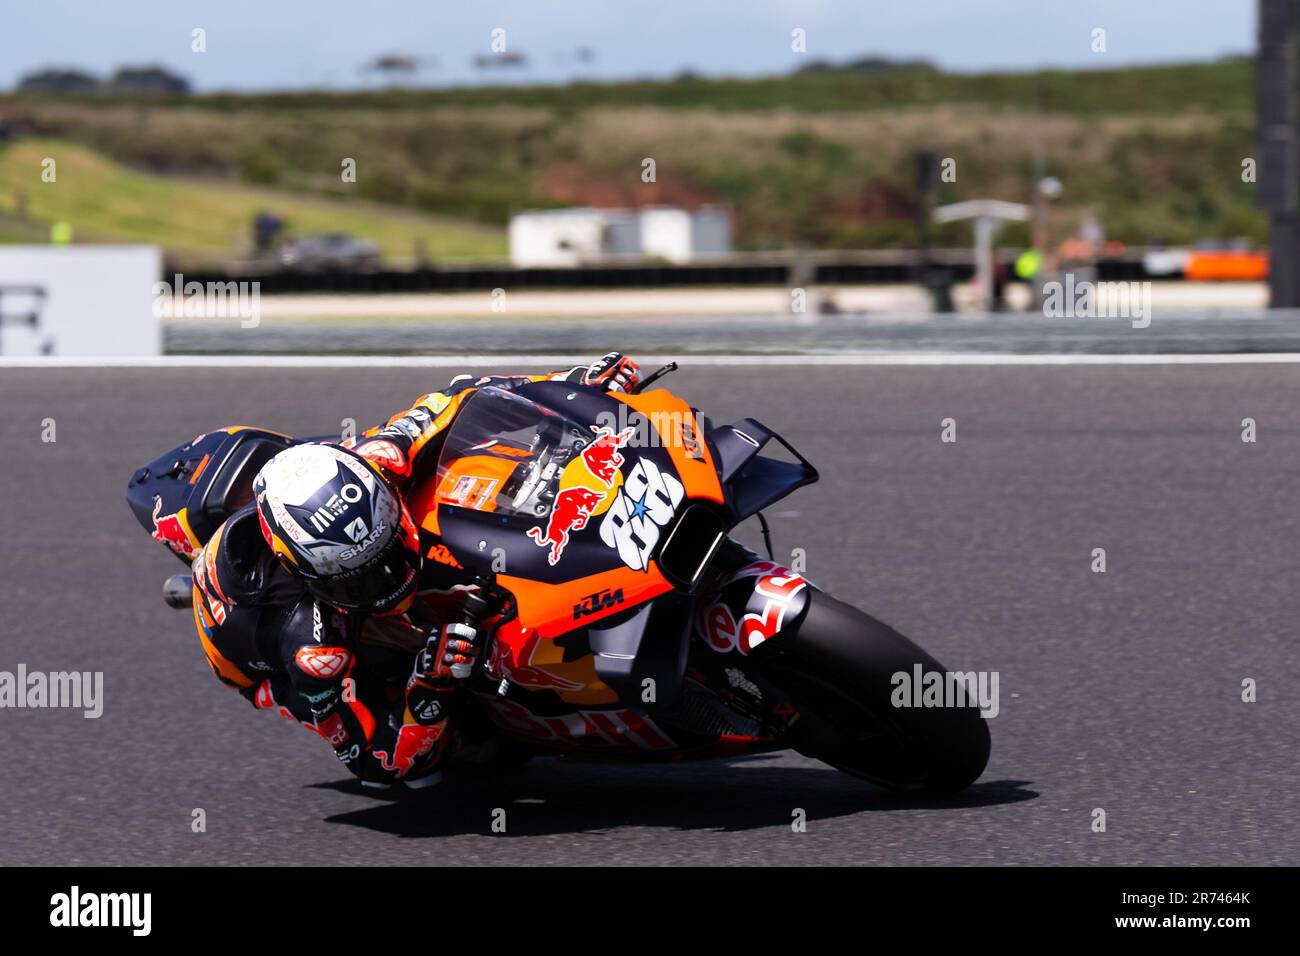 PHILLIP ISLAND, AUSTRALIA - OCTOBER 14: Miguel Oliveira of Portugal on the Red Bull KTM Factory Racing KTM during MotoGP Free Practice 2 at The 2022 Australian MotoGP at The Phillip Island Circuit on October 14, 2022 in Phillip Island, Australia. Stock Photo